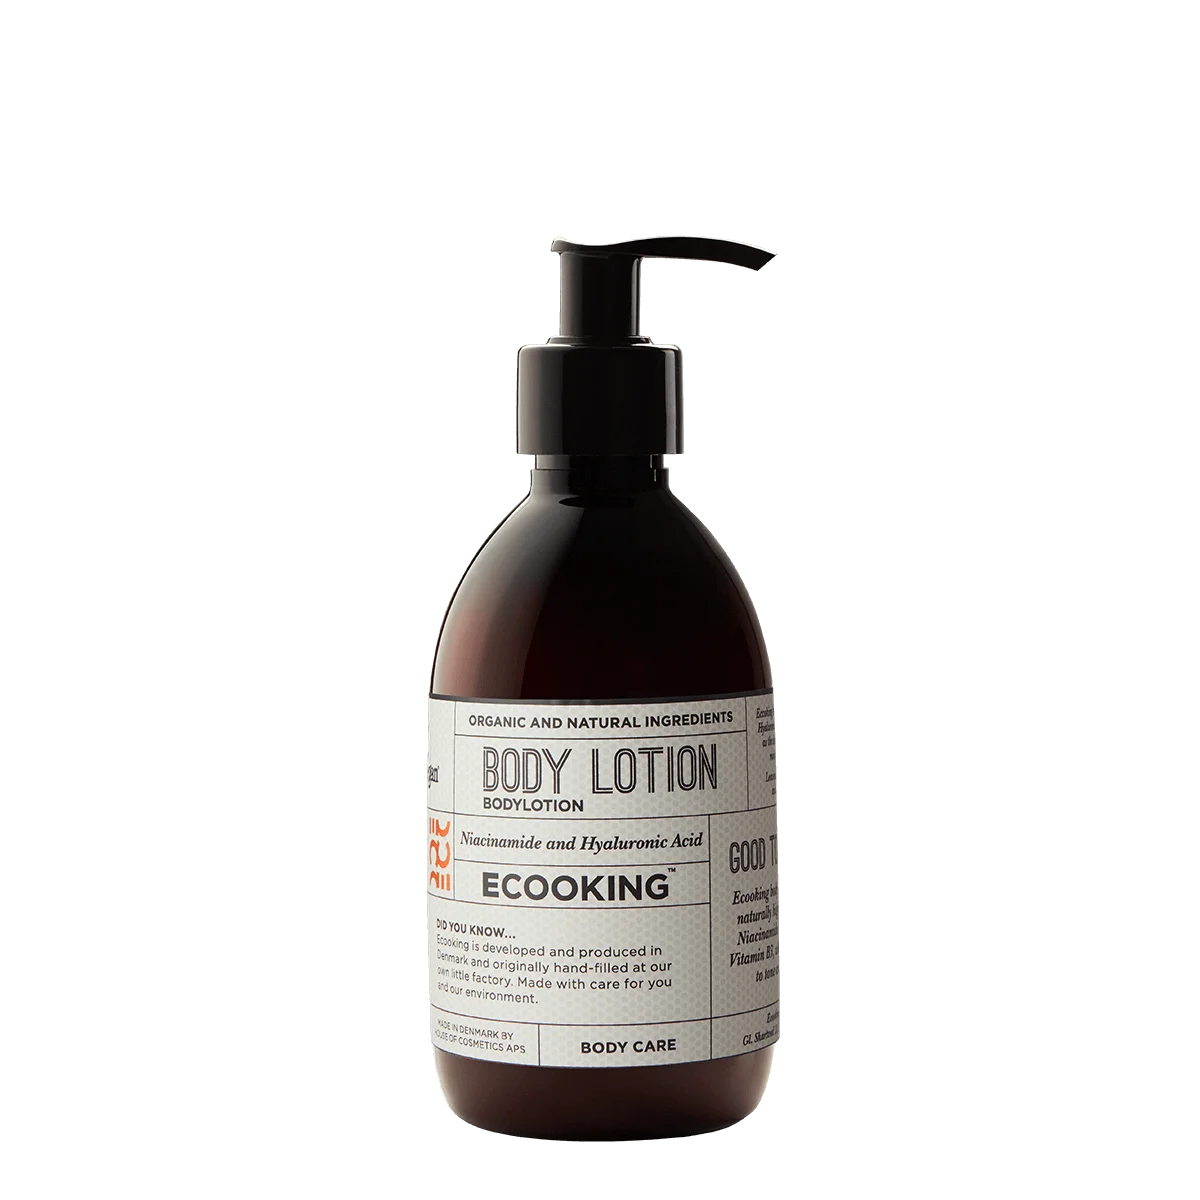 Ecooking body lotion.